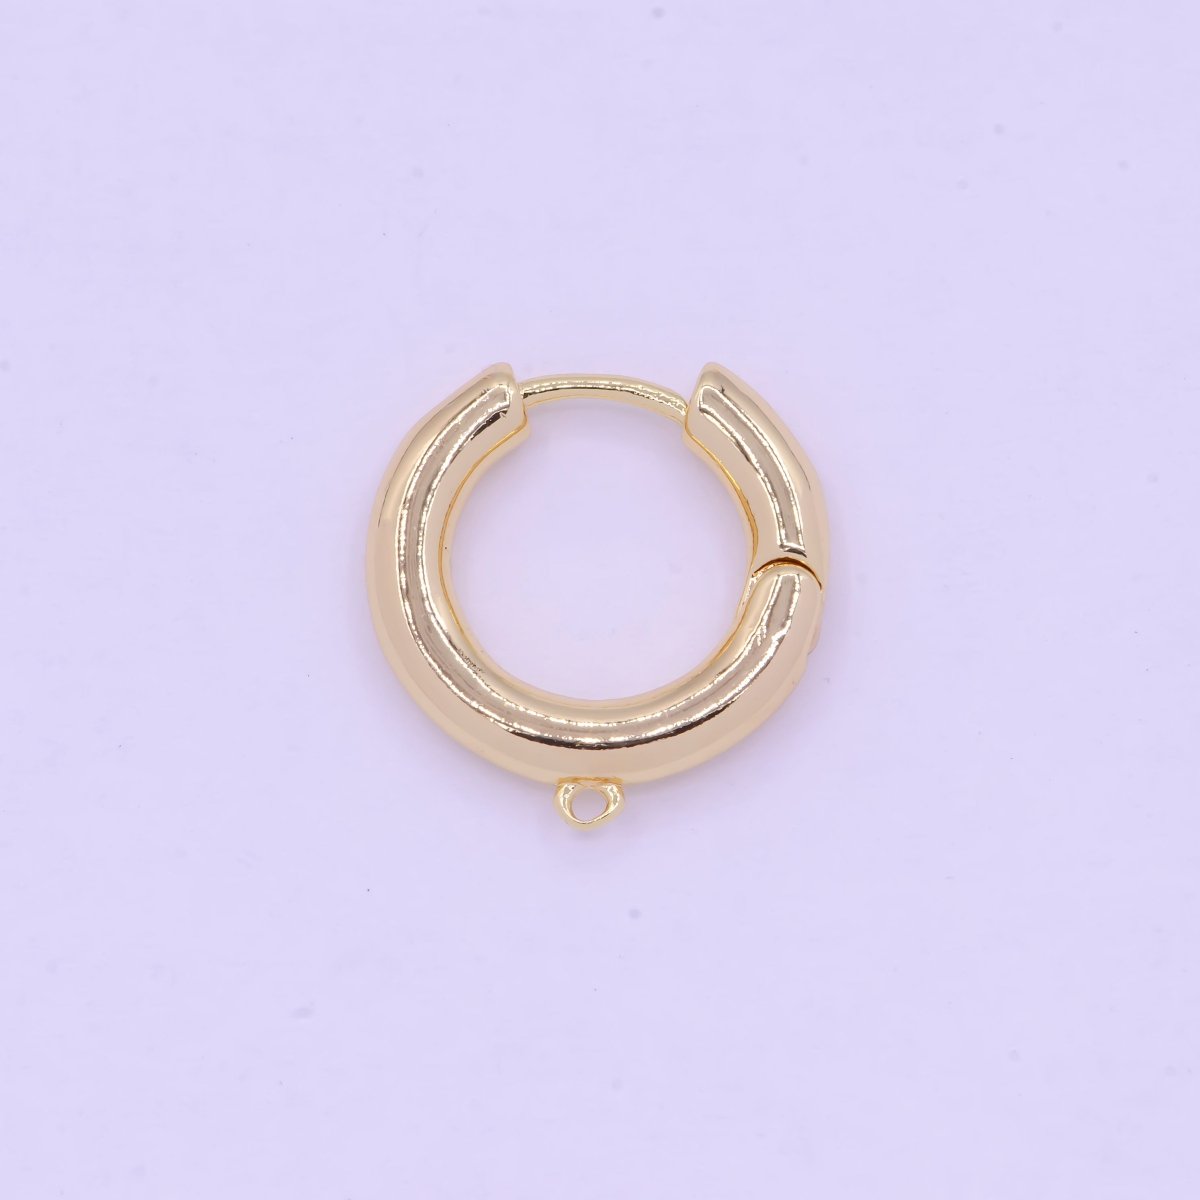 Gold Filled Earring Hoops Lever Back one touch w/ Close link Lever Hoop earring Nickel free Lead Free for Earring Charm Making Findings L-846 - DLUXCA